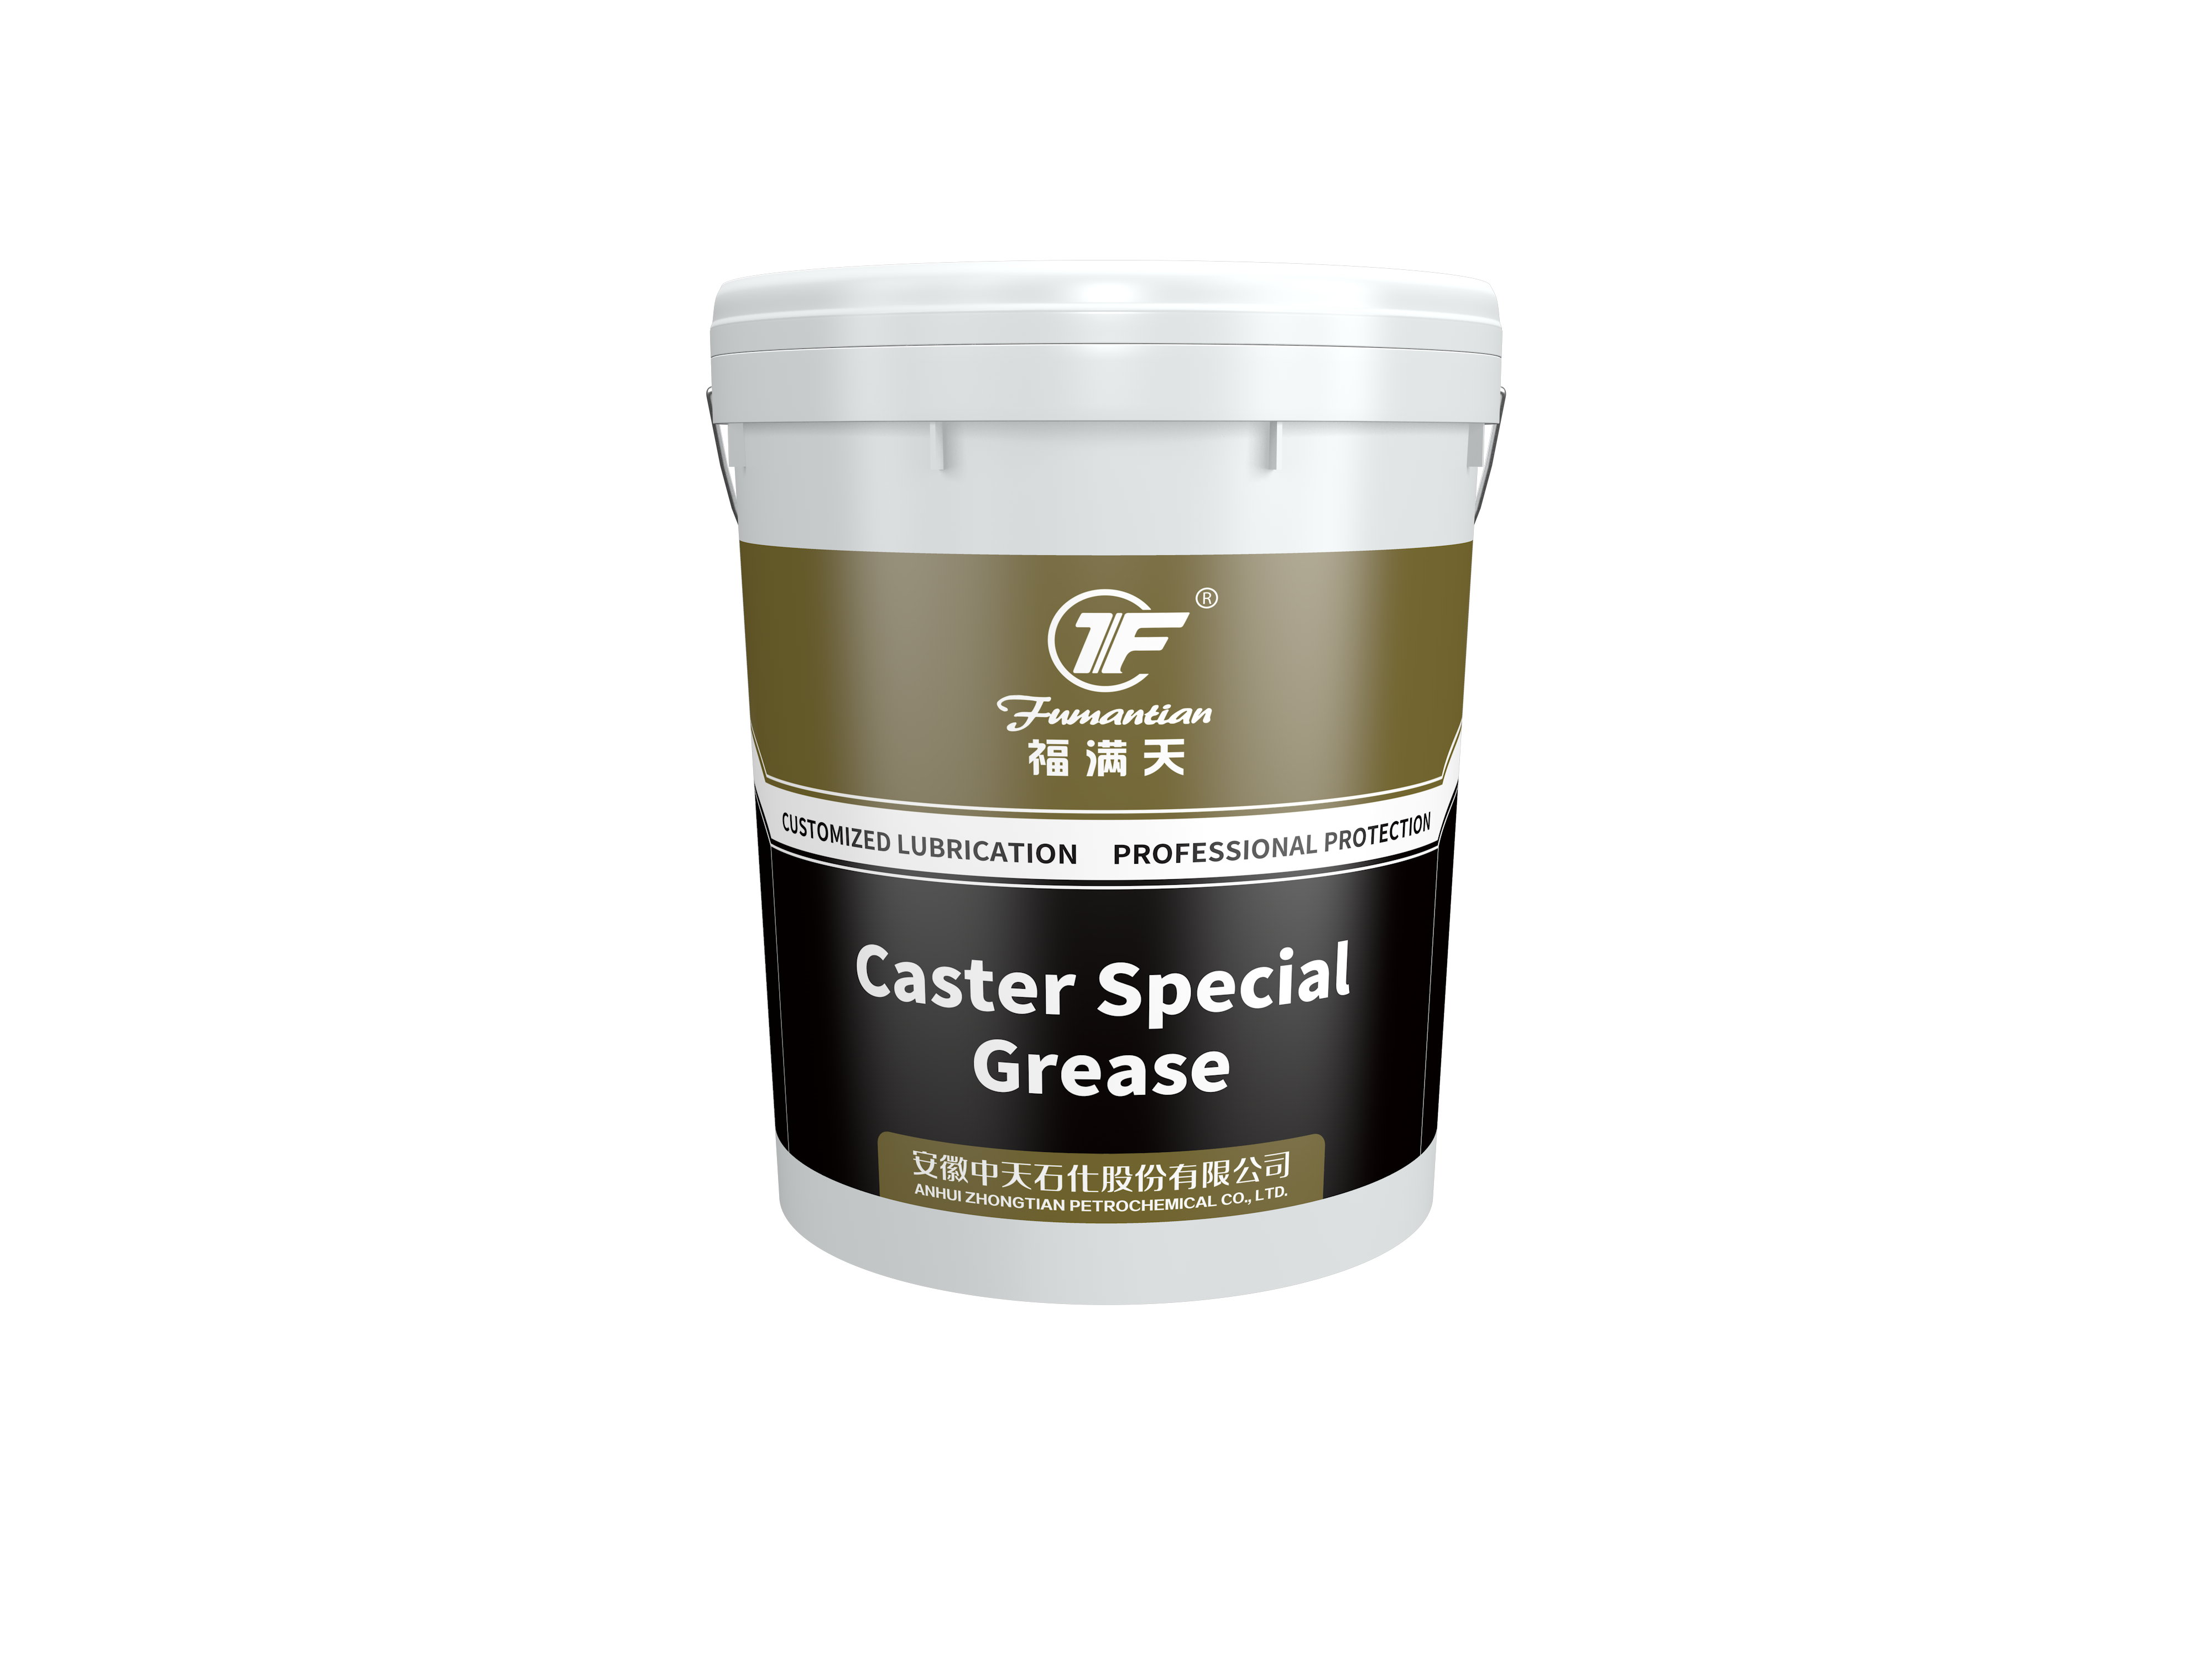 Caster Special Grease